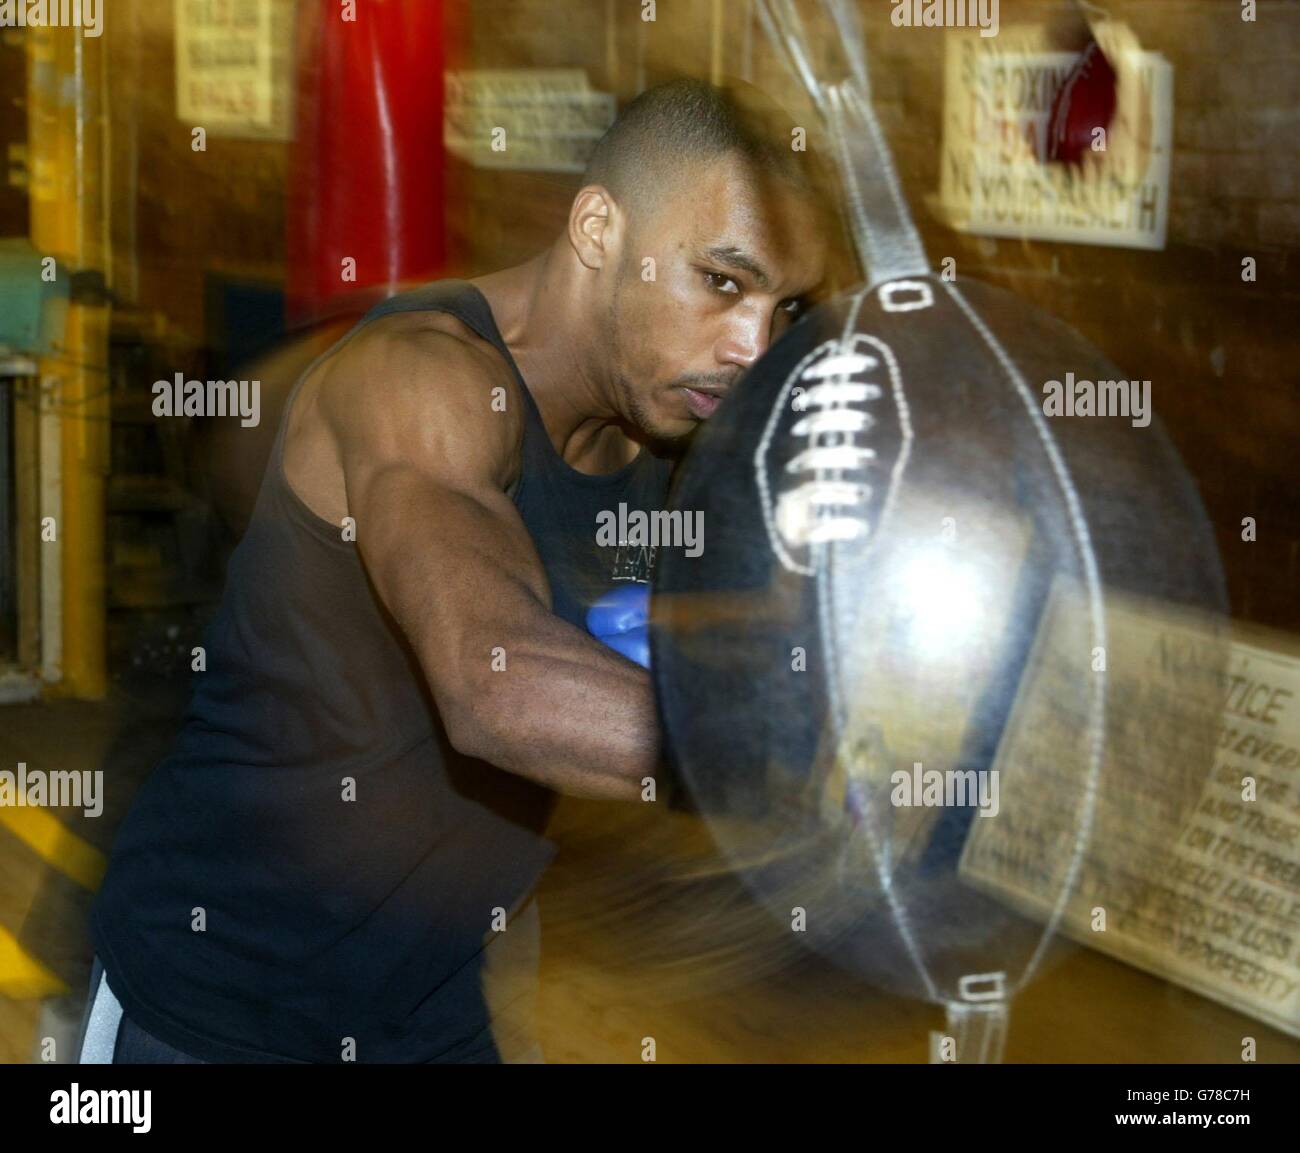 British Light-Welterweight Boxing Champion Junior Witter from Bradford, trains at Brendan Ingle's gym in Sheffield, ahead of his EU title fight with Jurgen Haeck from Belgium at Manchester's MEN Arena on April 5, where Manchester's Ricky Hatton will top the bill. Stock Photo